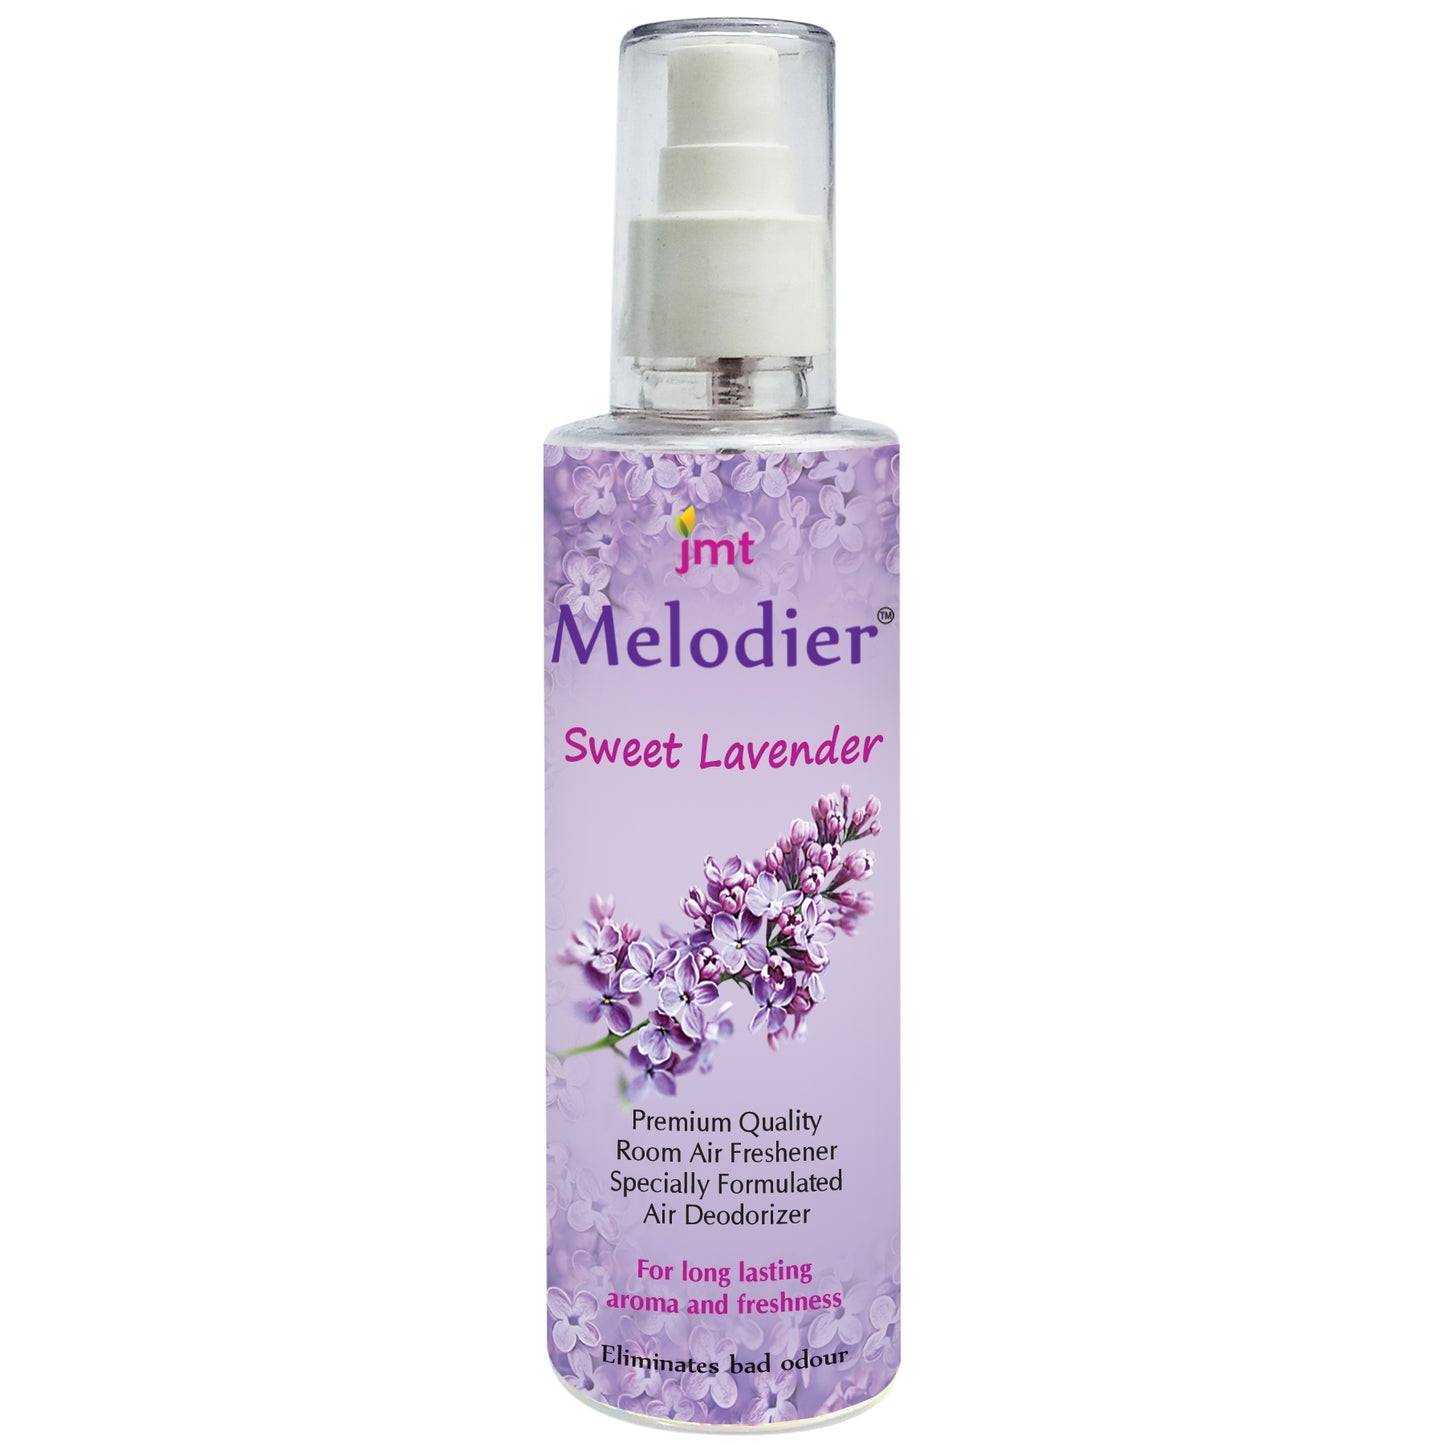 Melodier Sweet Lavender - Premium Quality Room Air Freshener with Air Deodorizer